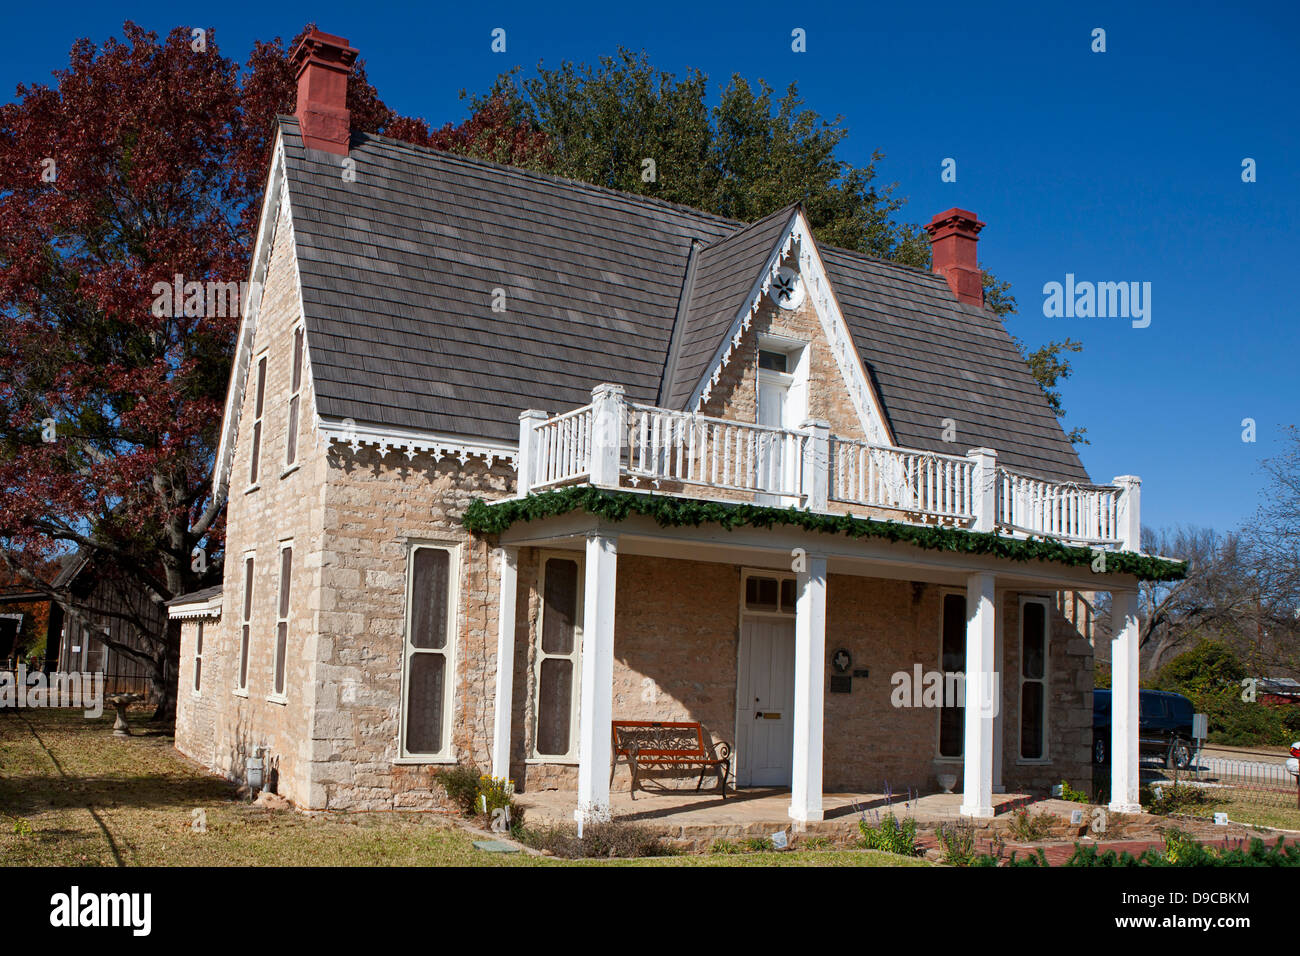 Exterior of the J.D Berry House, the oldest house in Stephenville, Texas, United States of America Stock Photo